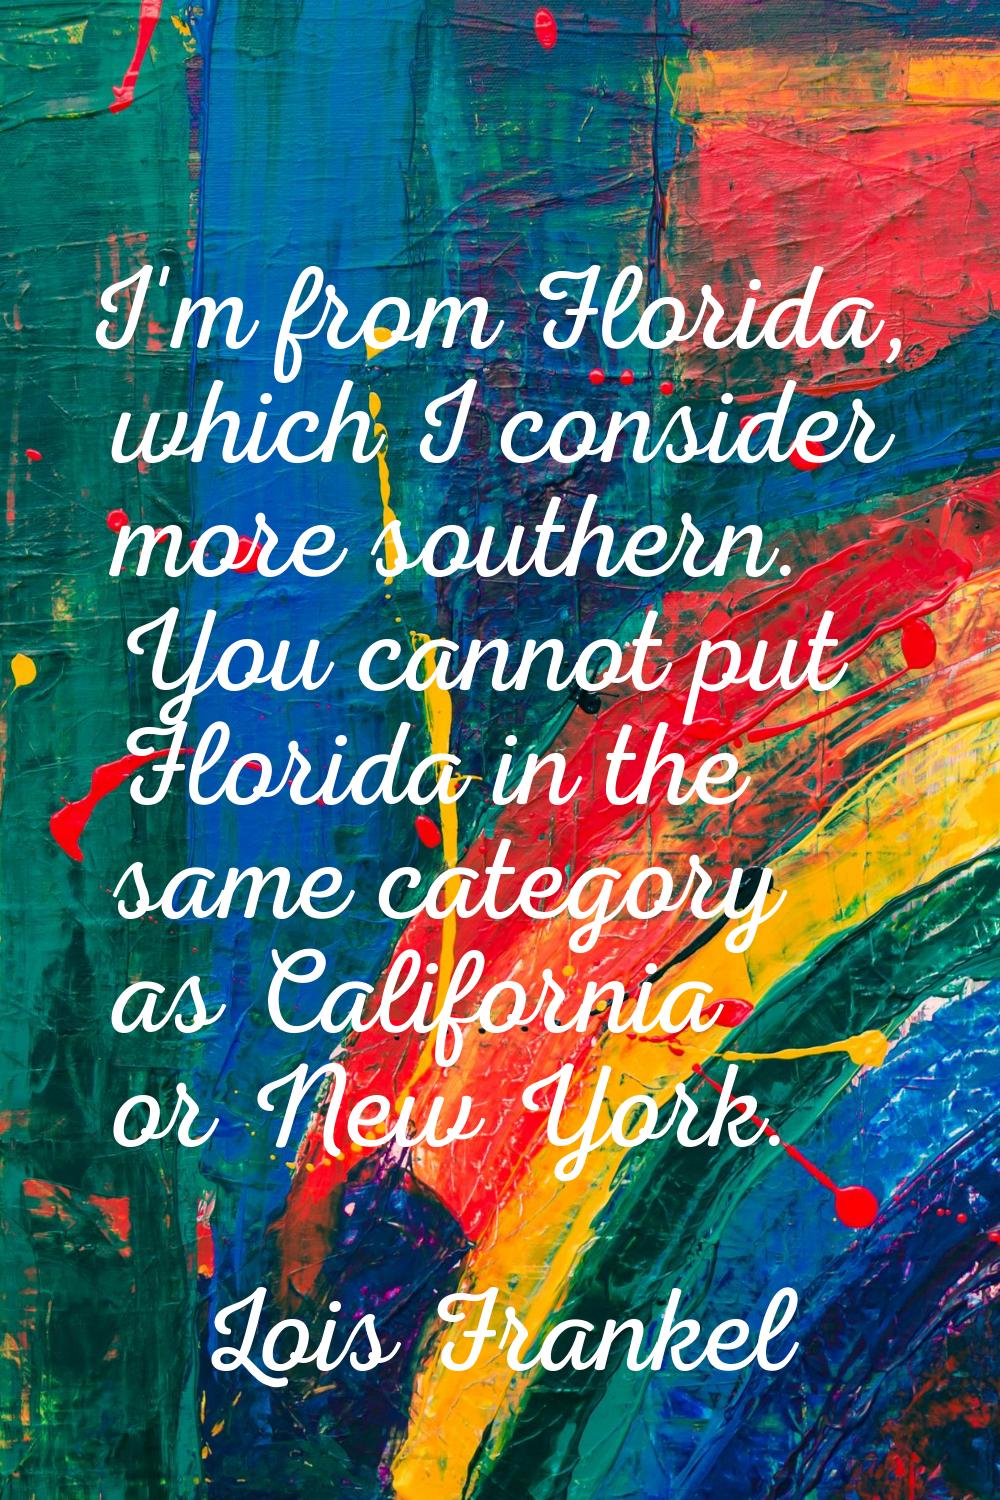 I'm from Florida, which I consider more southern. You cannot put Florida in the same category as Ca